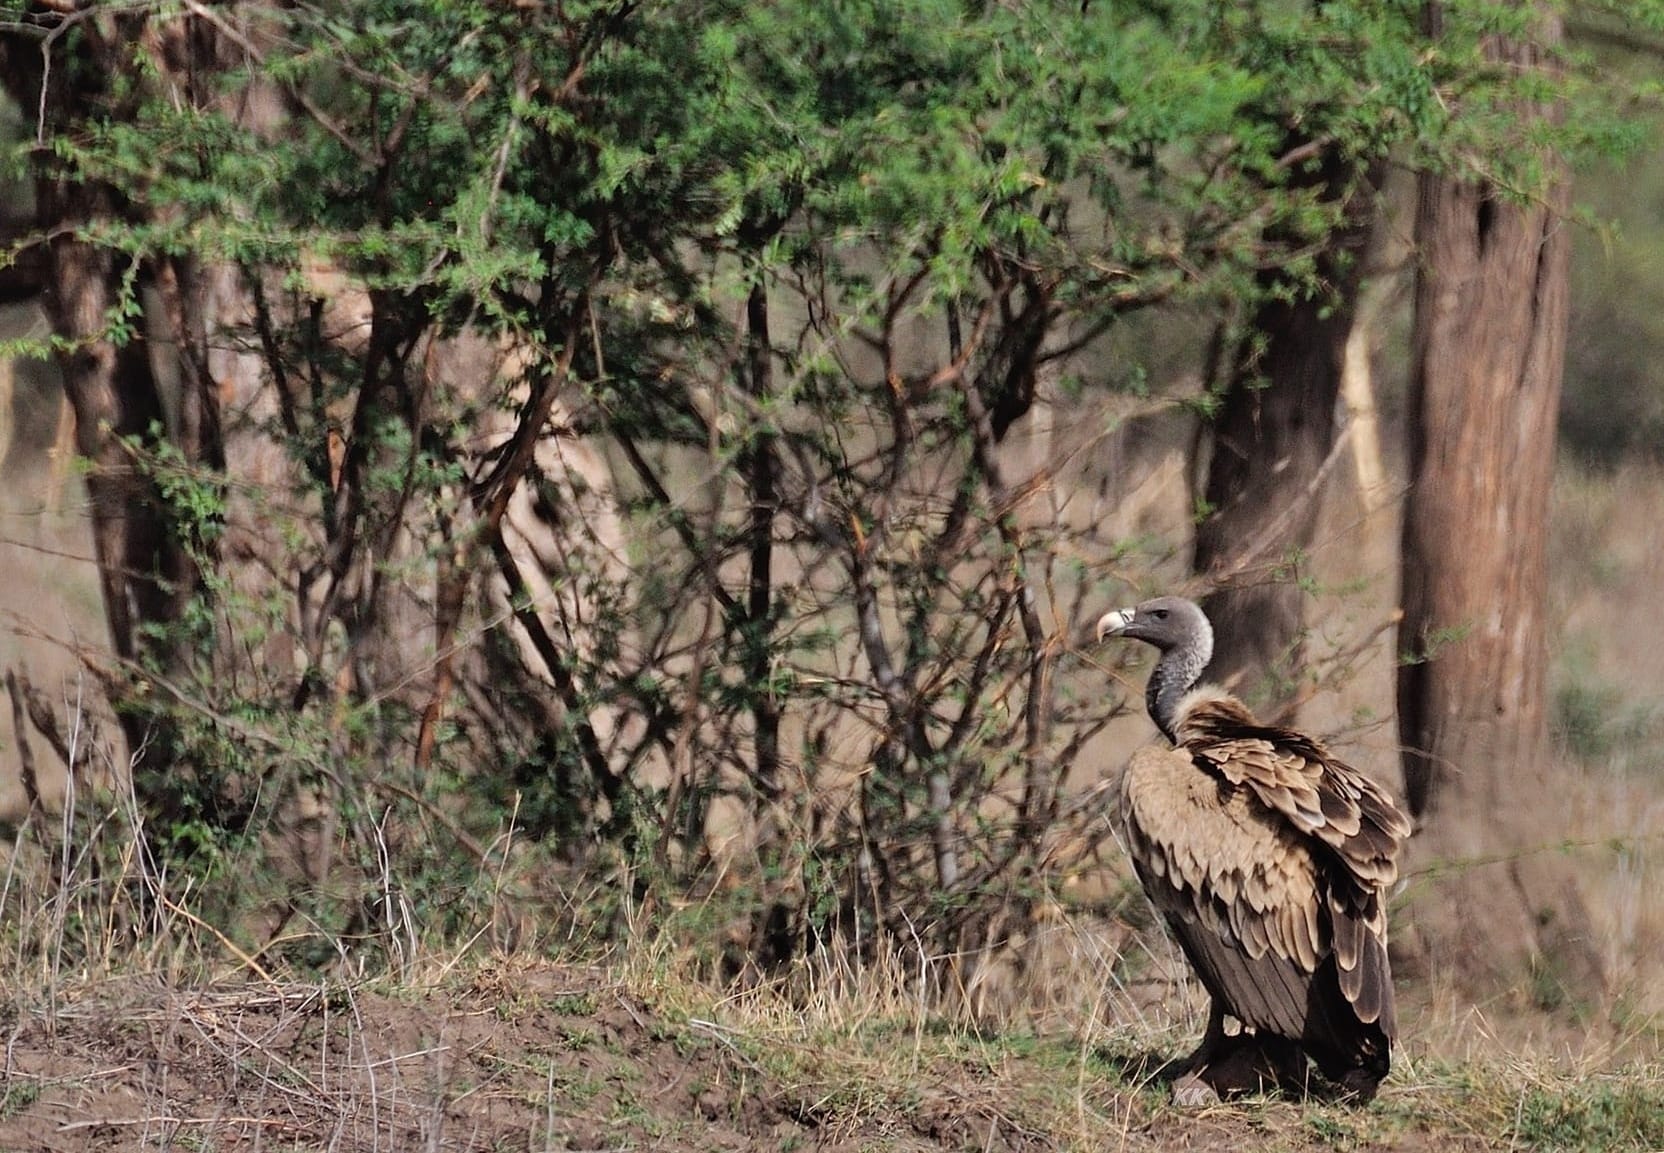 A vulture standing on the ground next to a thicket of trees and shrubs